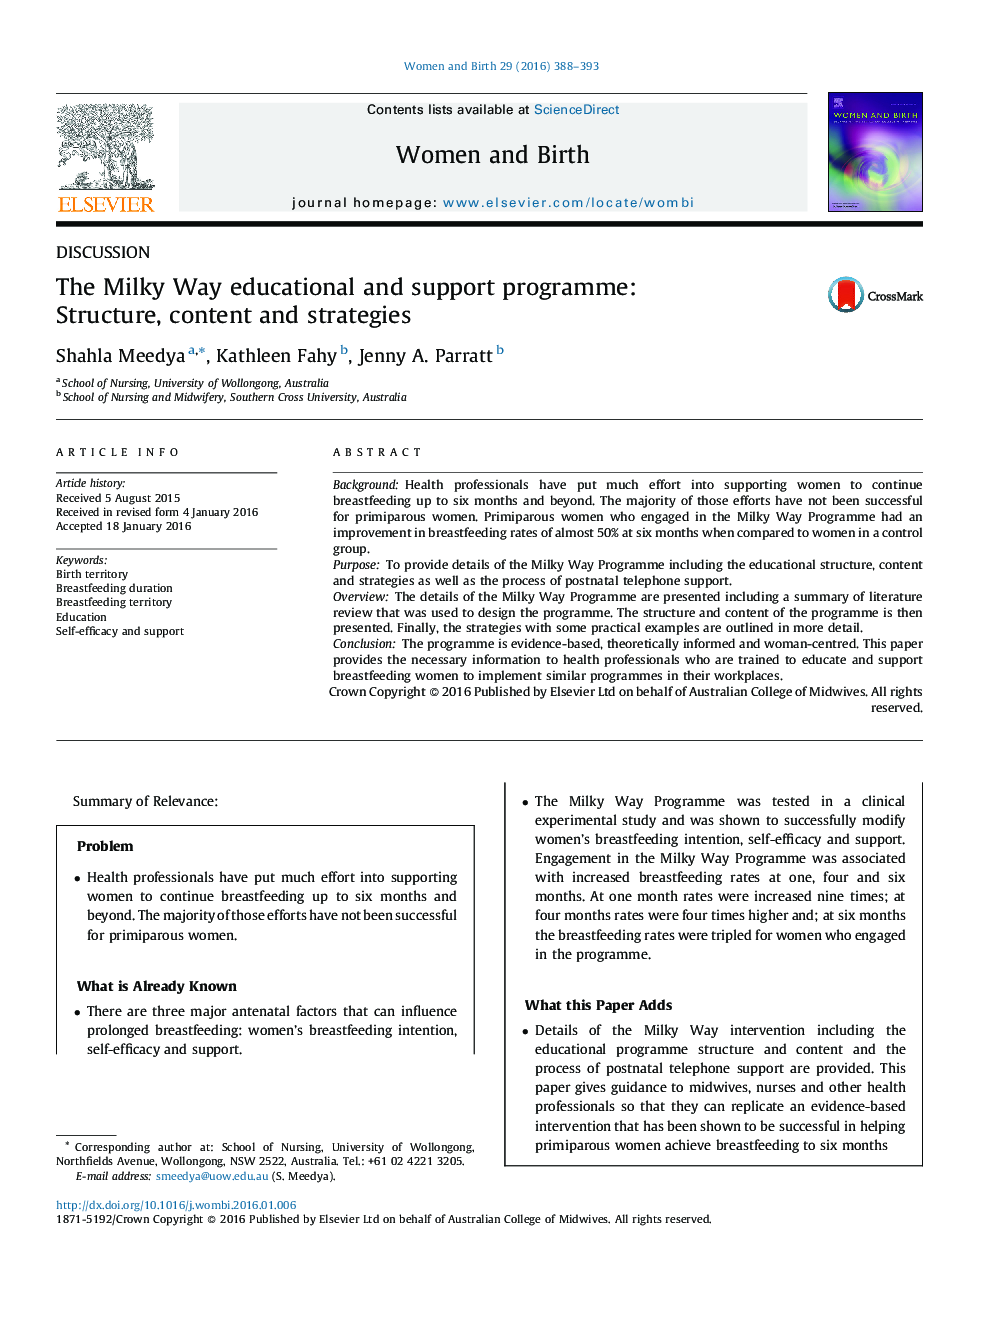 The Milky Way educational and support programme: Structure, content and strategies